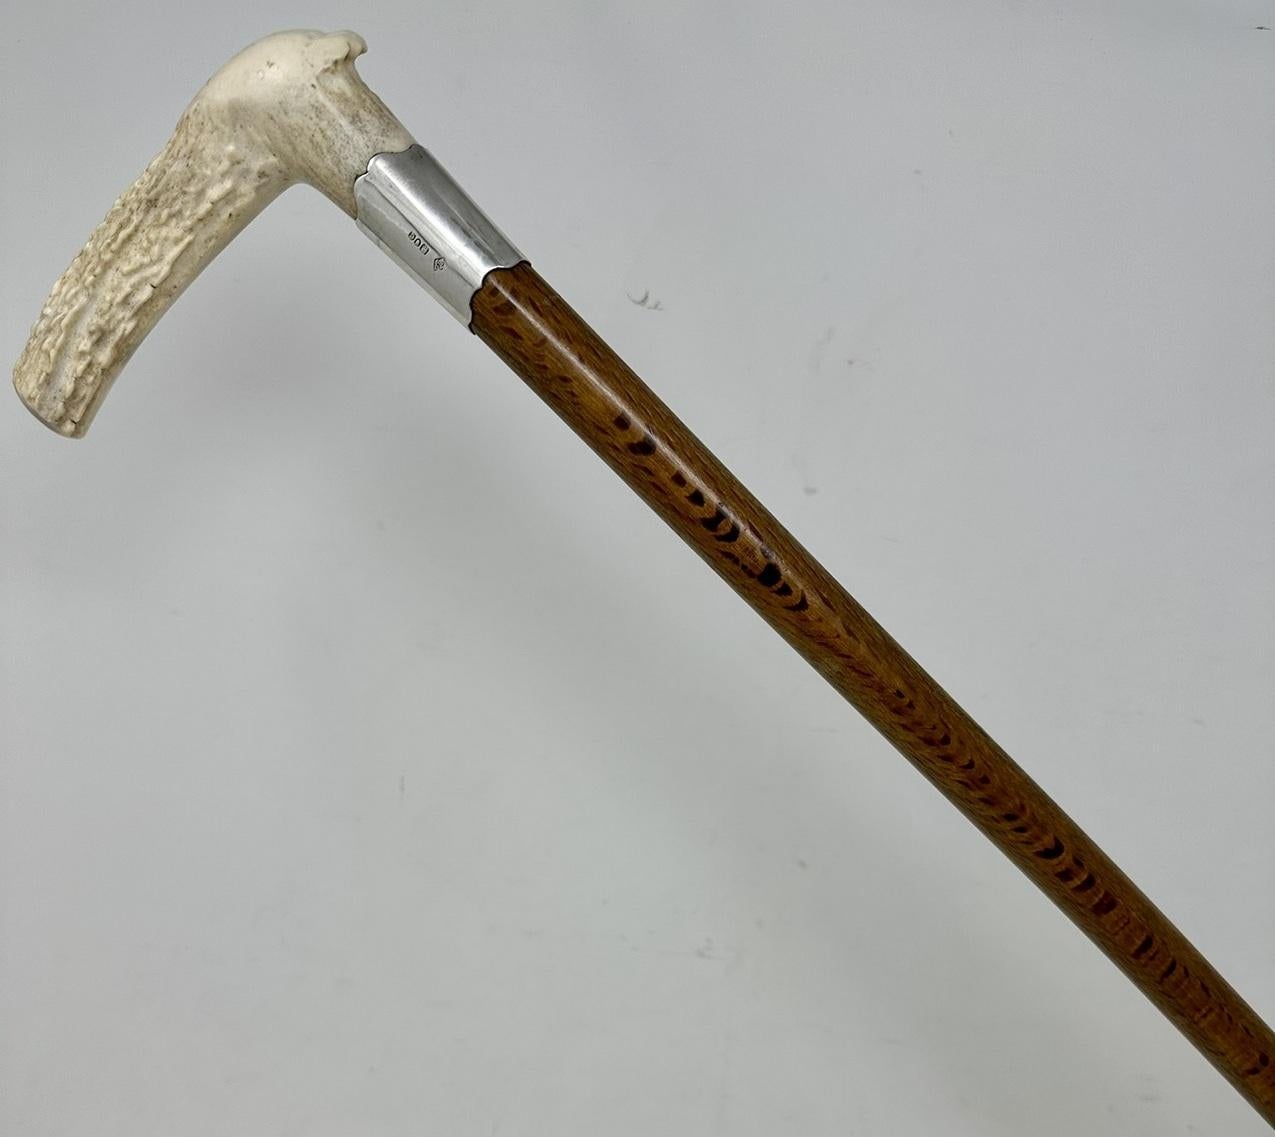 Superb Speckled Honey Toned Malacca Lady's or Gentlemans Walking Stick of outstanding quality Stick with Tau shaped Grip with plain silver mount ending with its original bi-metal (brass and steel) ferrule. 
The naturalistic Stag Antler Horn grip